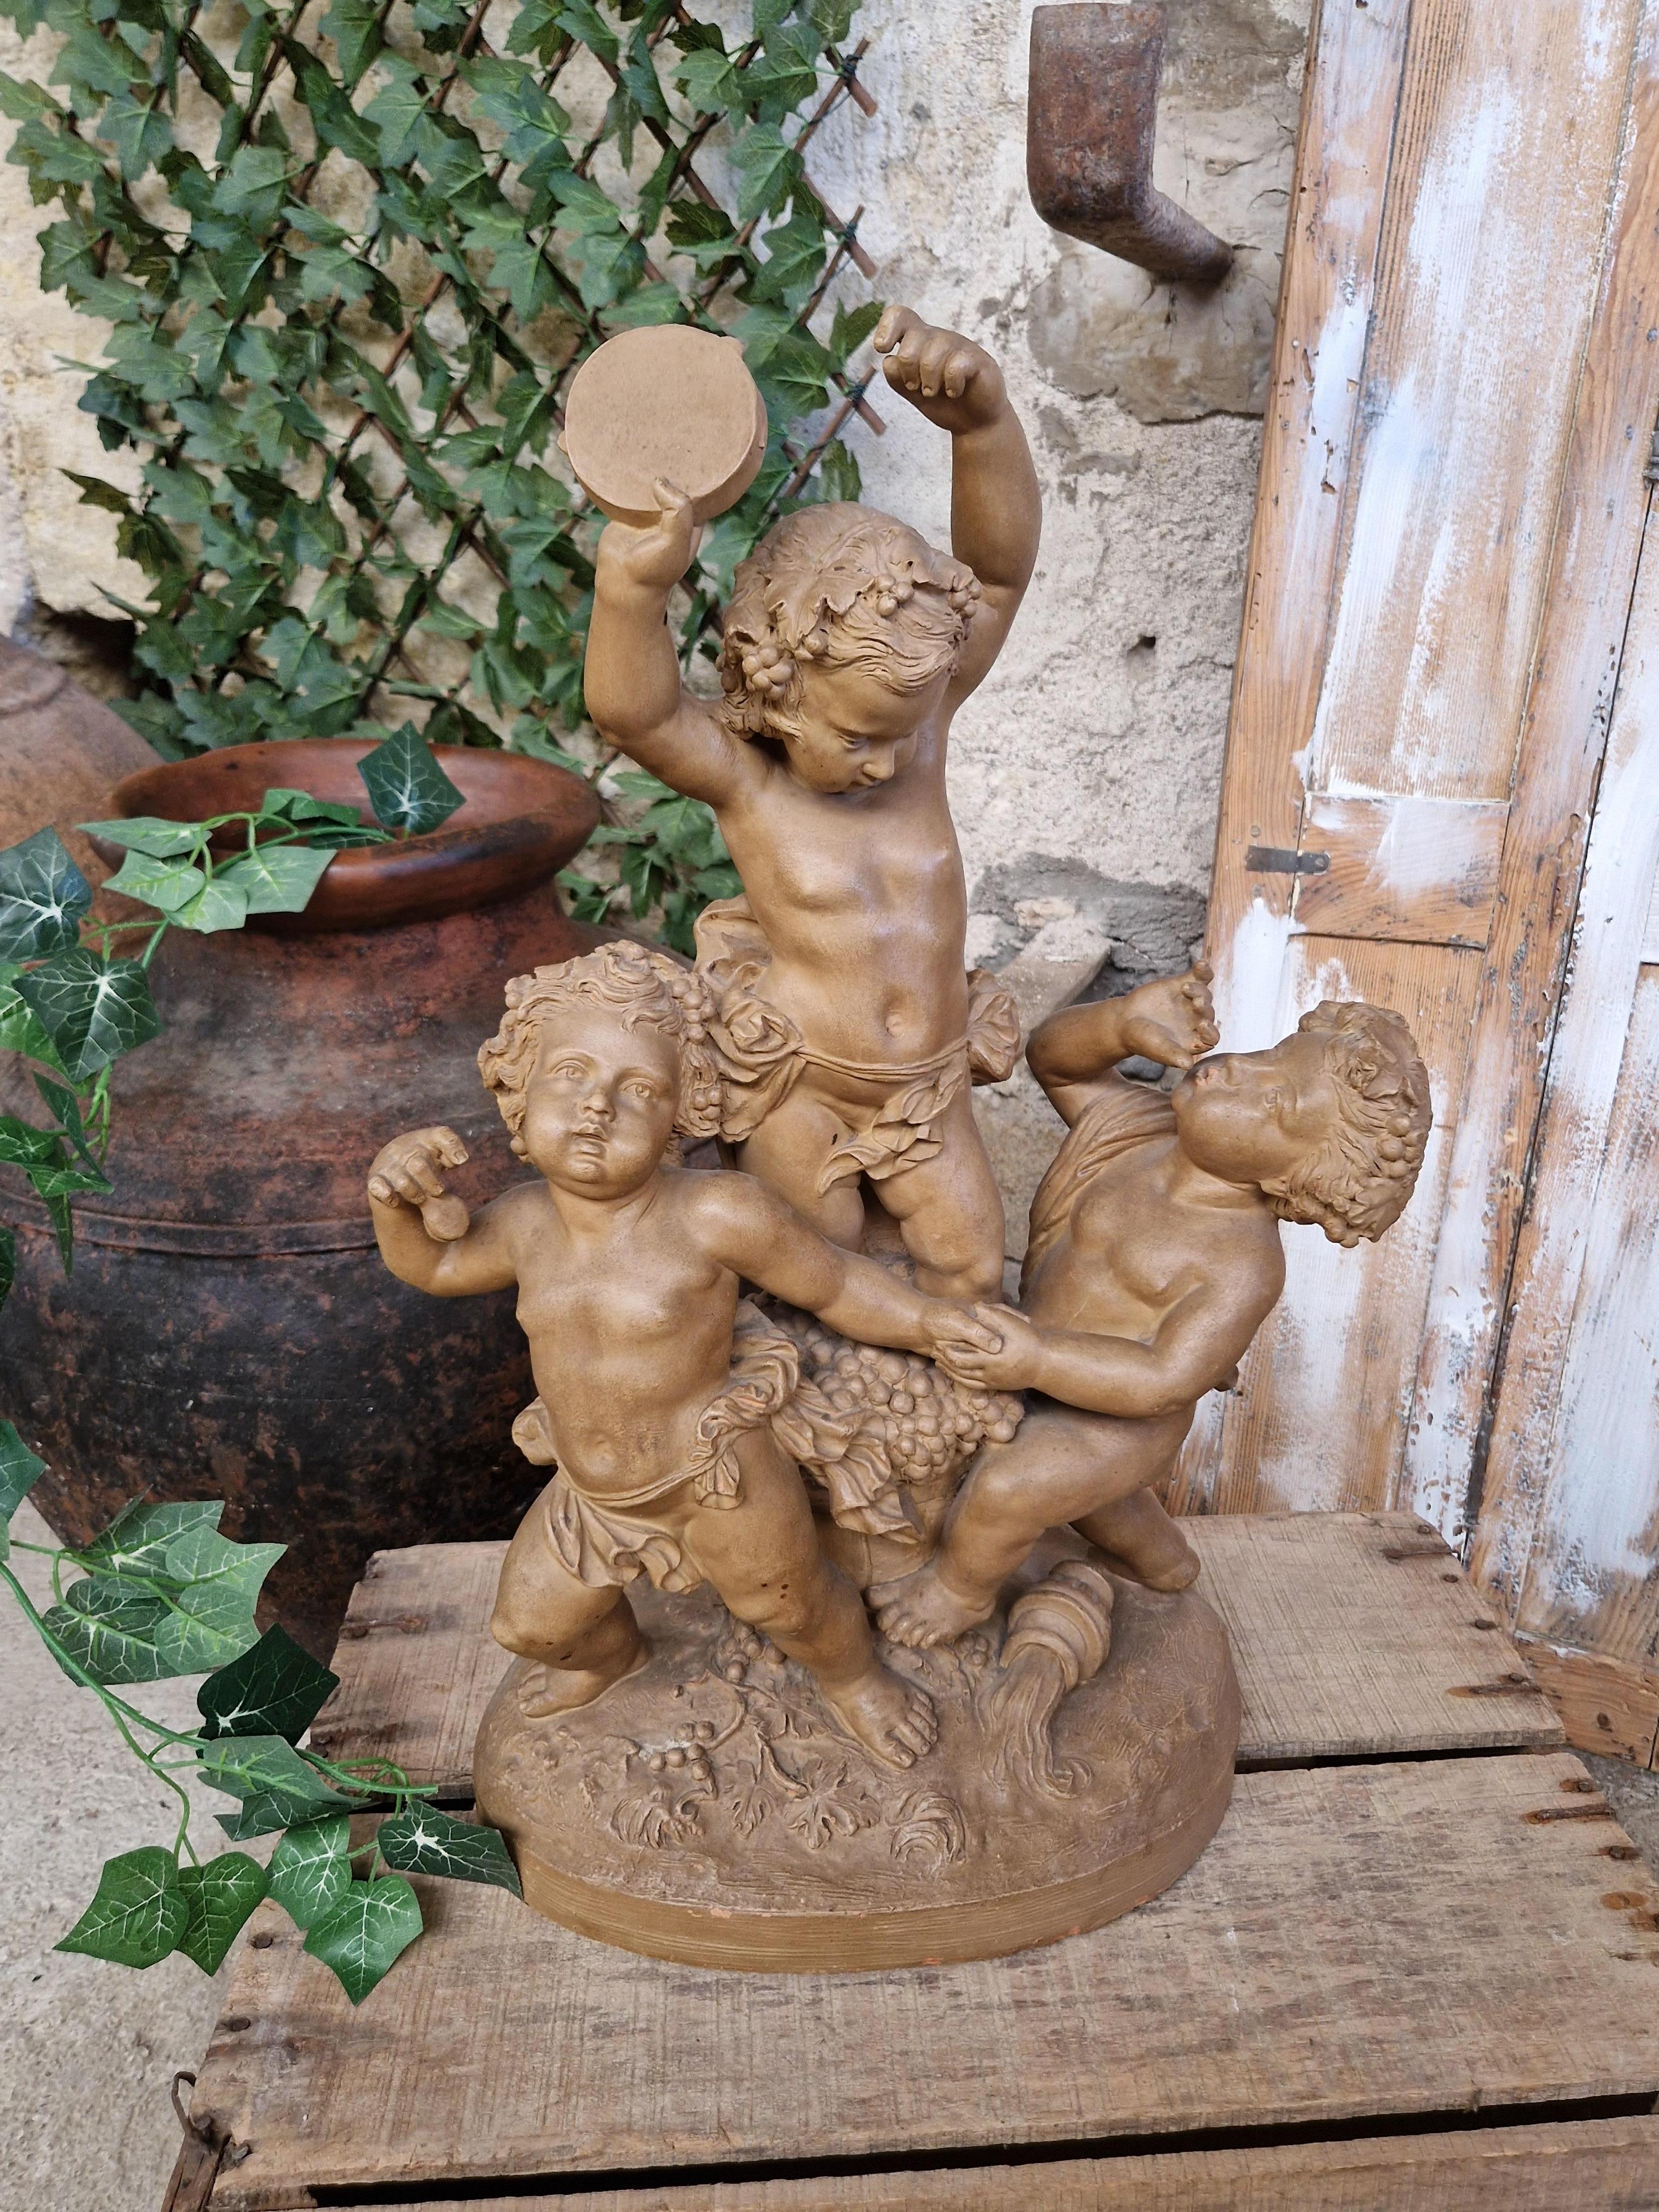 Absolutely Beautiful Sculpture by L Livi a French Artist

The Statue is named Dancing Cupids

In Terracotta with nice Patina

French Origin

Beautiful Carved Details

Unique Piece

19th century 

Signed 